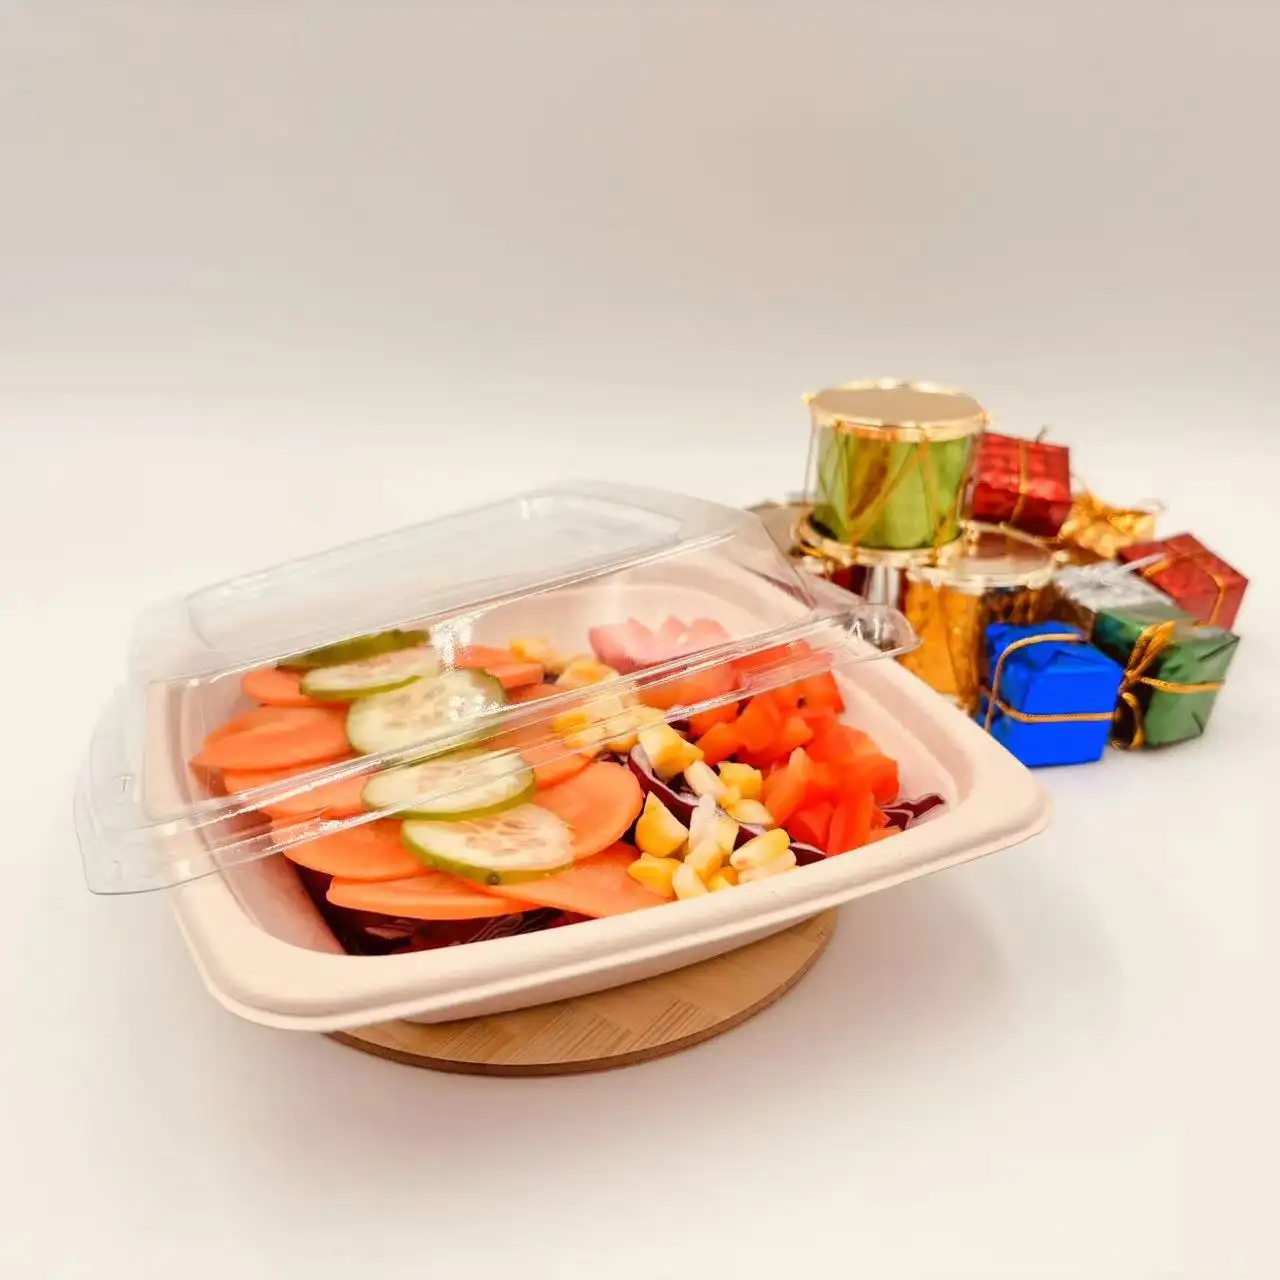 Take Out sugarcane eco-friendly Box Biodegradable Takeaway Disposable food Containers Fast Food Packaging